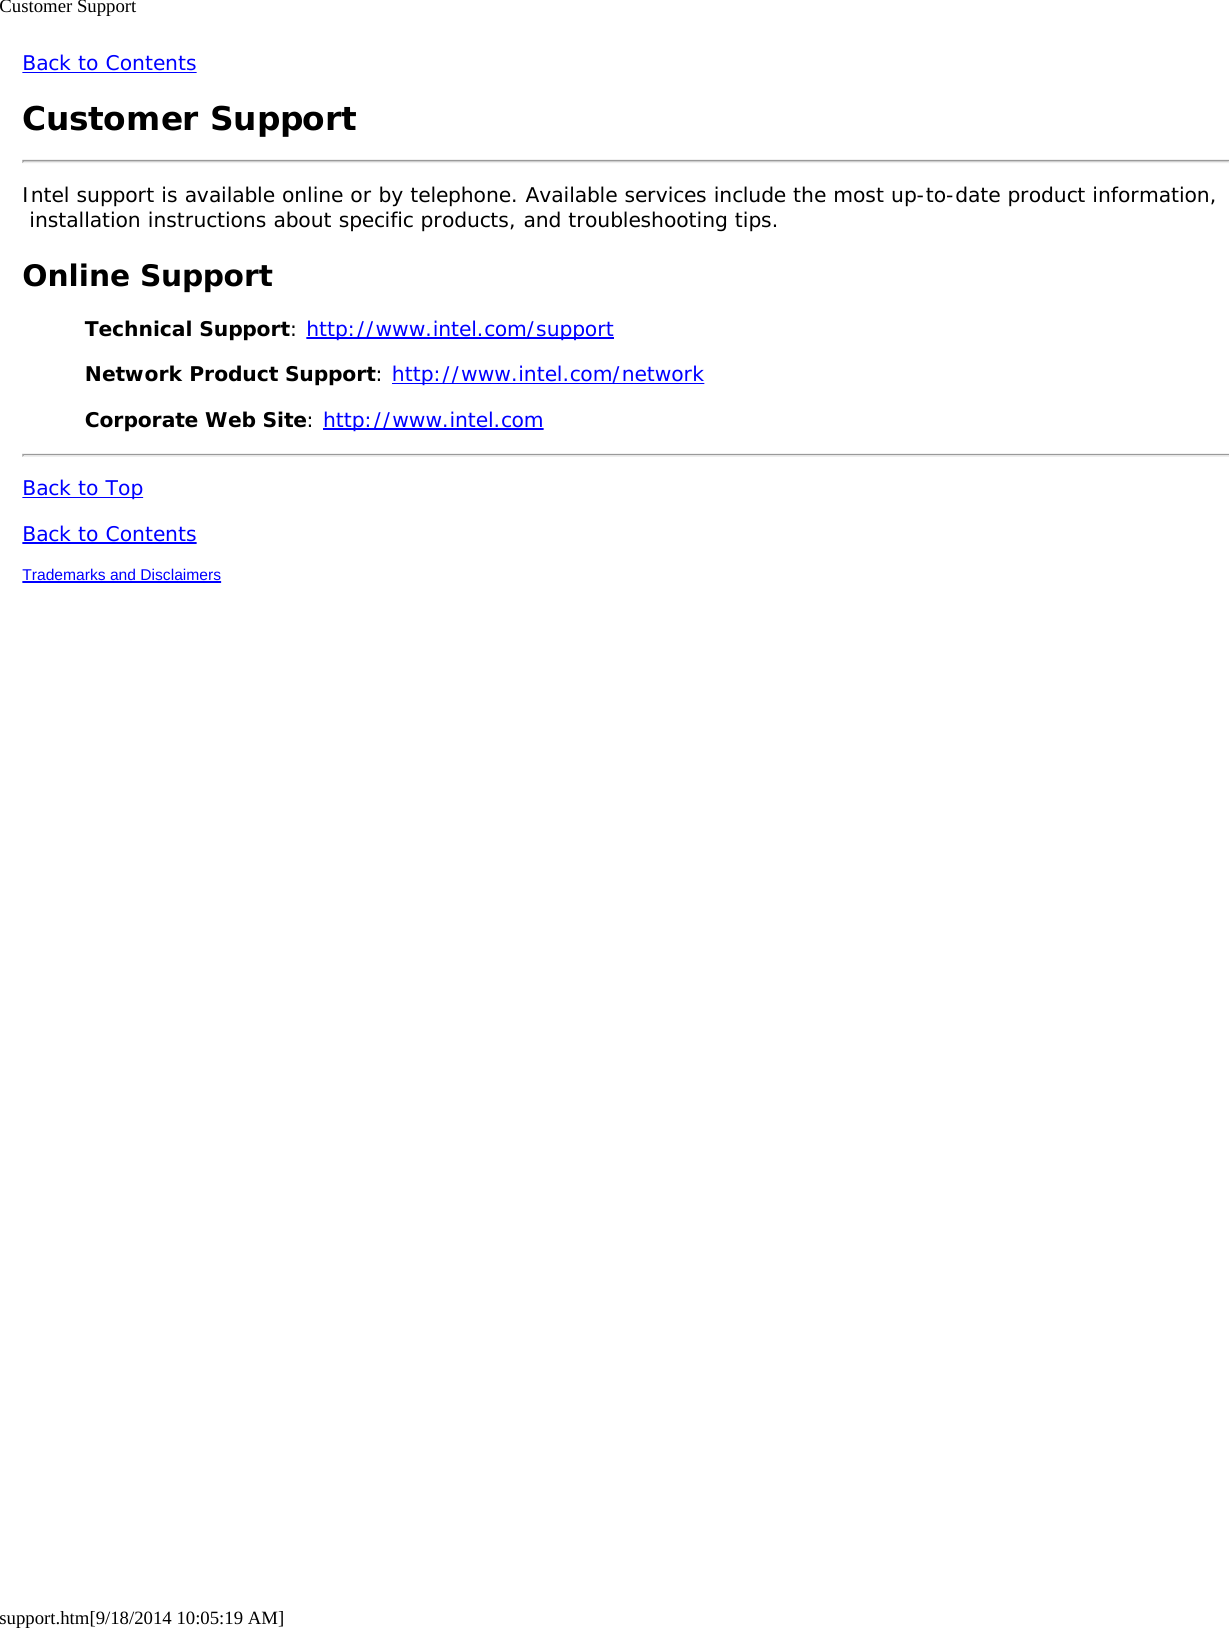 Customer Supportsupport.htm[9/18/2014 10:05:19 AM]Back to ContentsCustomer SupportIntel support is available online or by telephone. Available services include the most up-to-date product information, installation instructions about specific products, and troubleshooting tips.Online SupportTechnical Support: http://www.intel.com/supportNetwork Product Support: http://www.intel.com/networkCorporate Web Site: http://www.intel.comBack to TopBack to ContentsTrademarks and Disclaimers